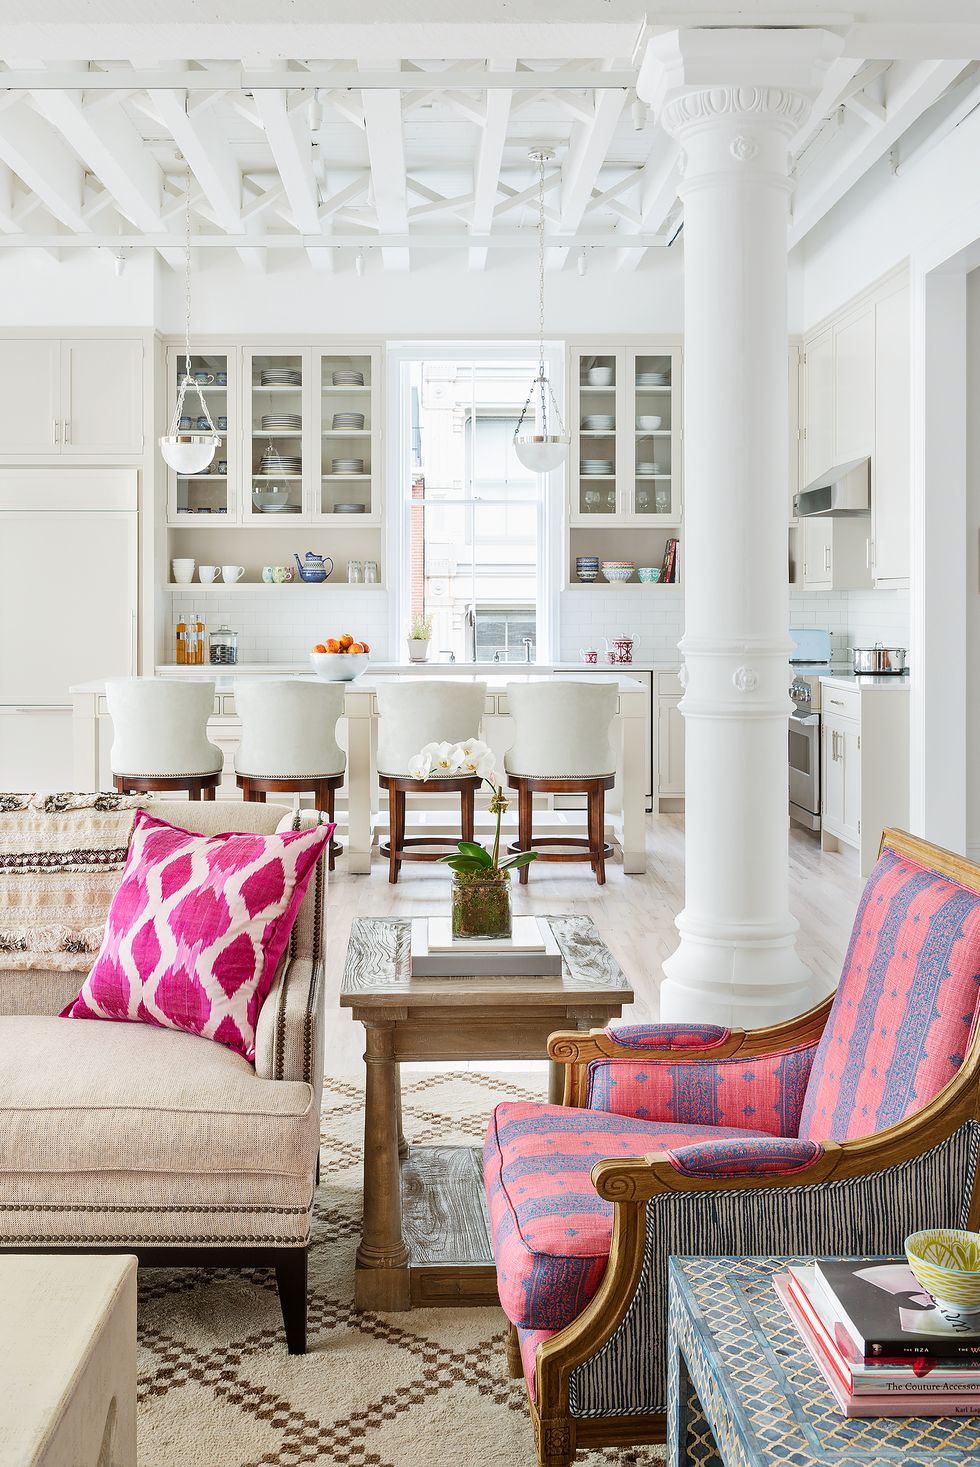 20 Classy and Cheerful Pink Living Rooms